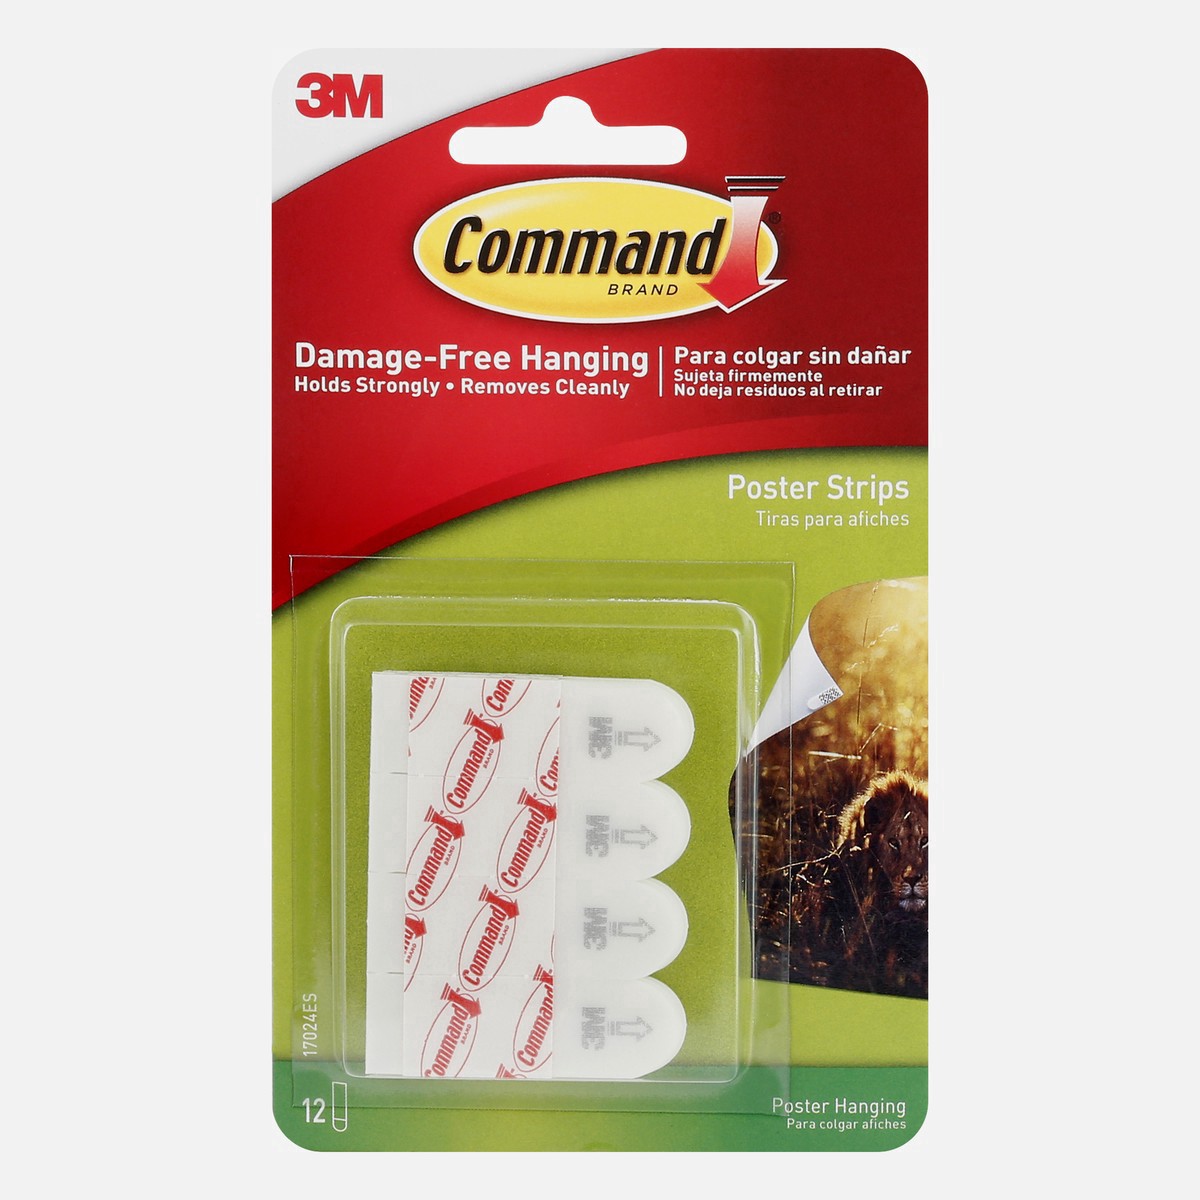 slide 4 of 10, 3M Command Poster Damage-Free Hanging Strips, 12 ct